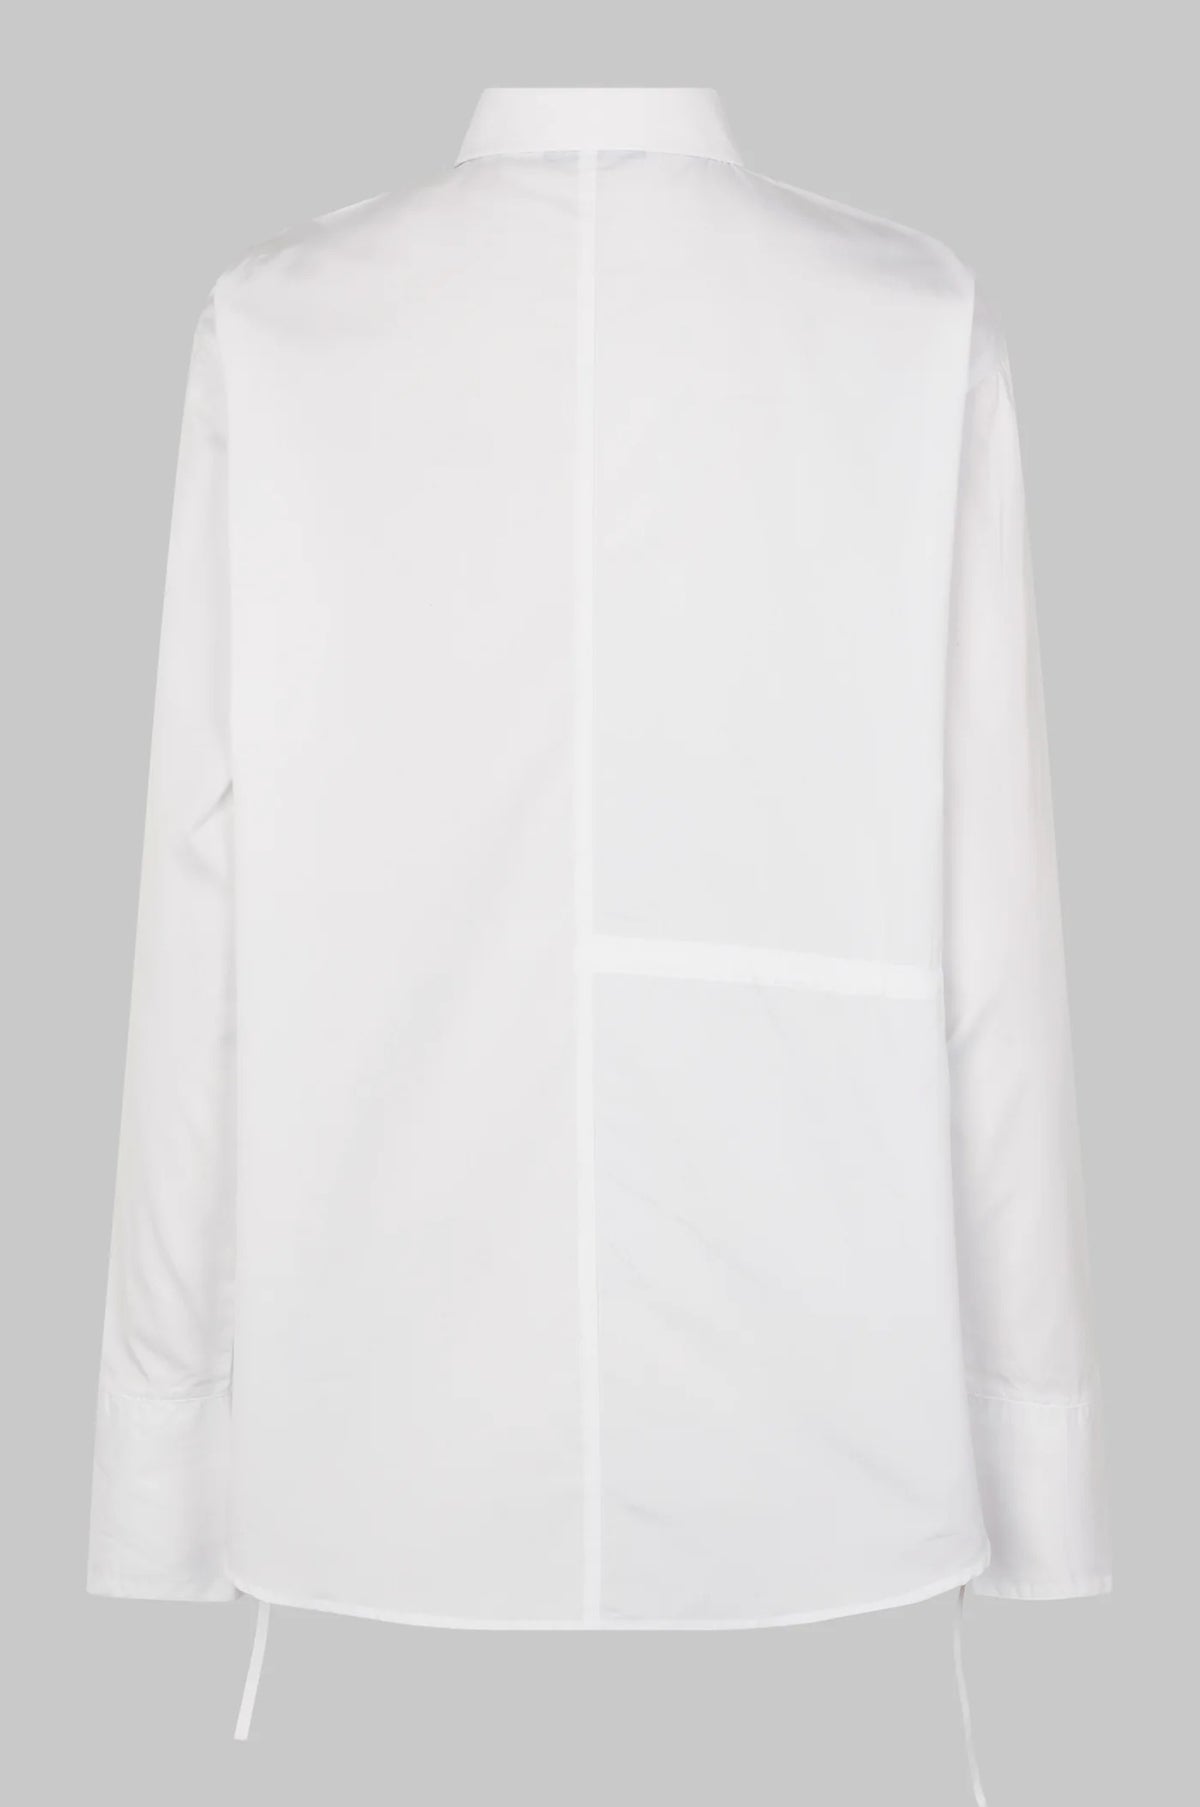 Oval Square Rosy Shirt // White